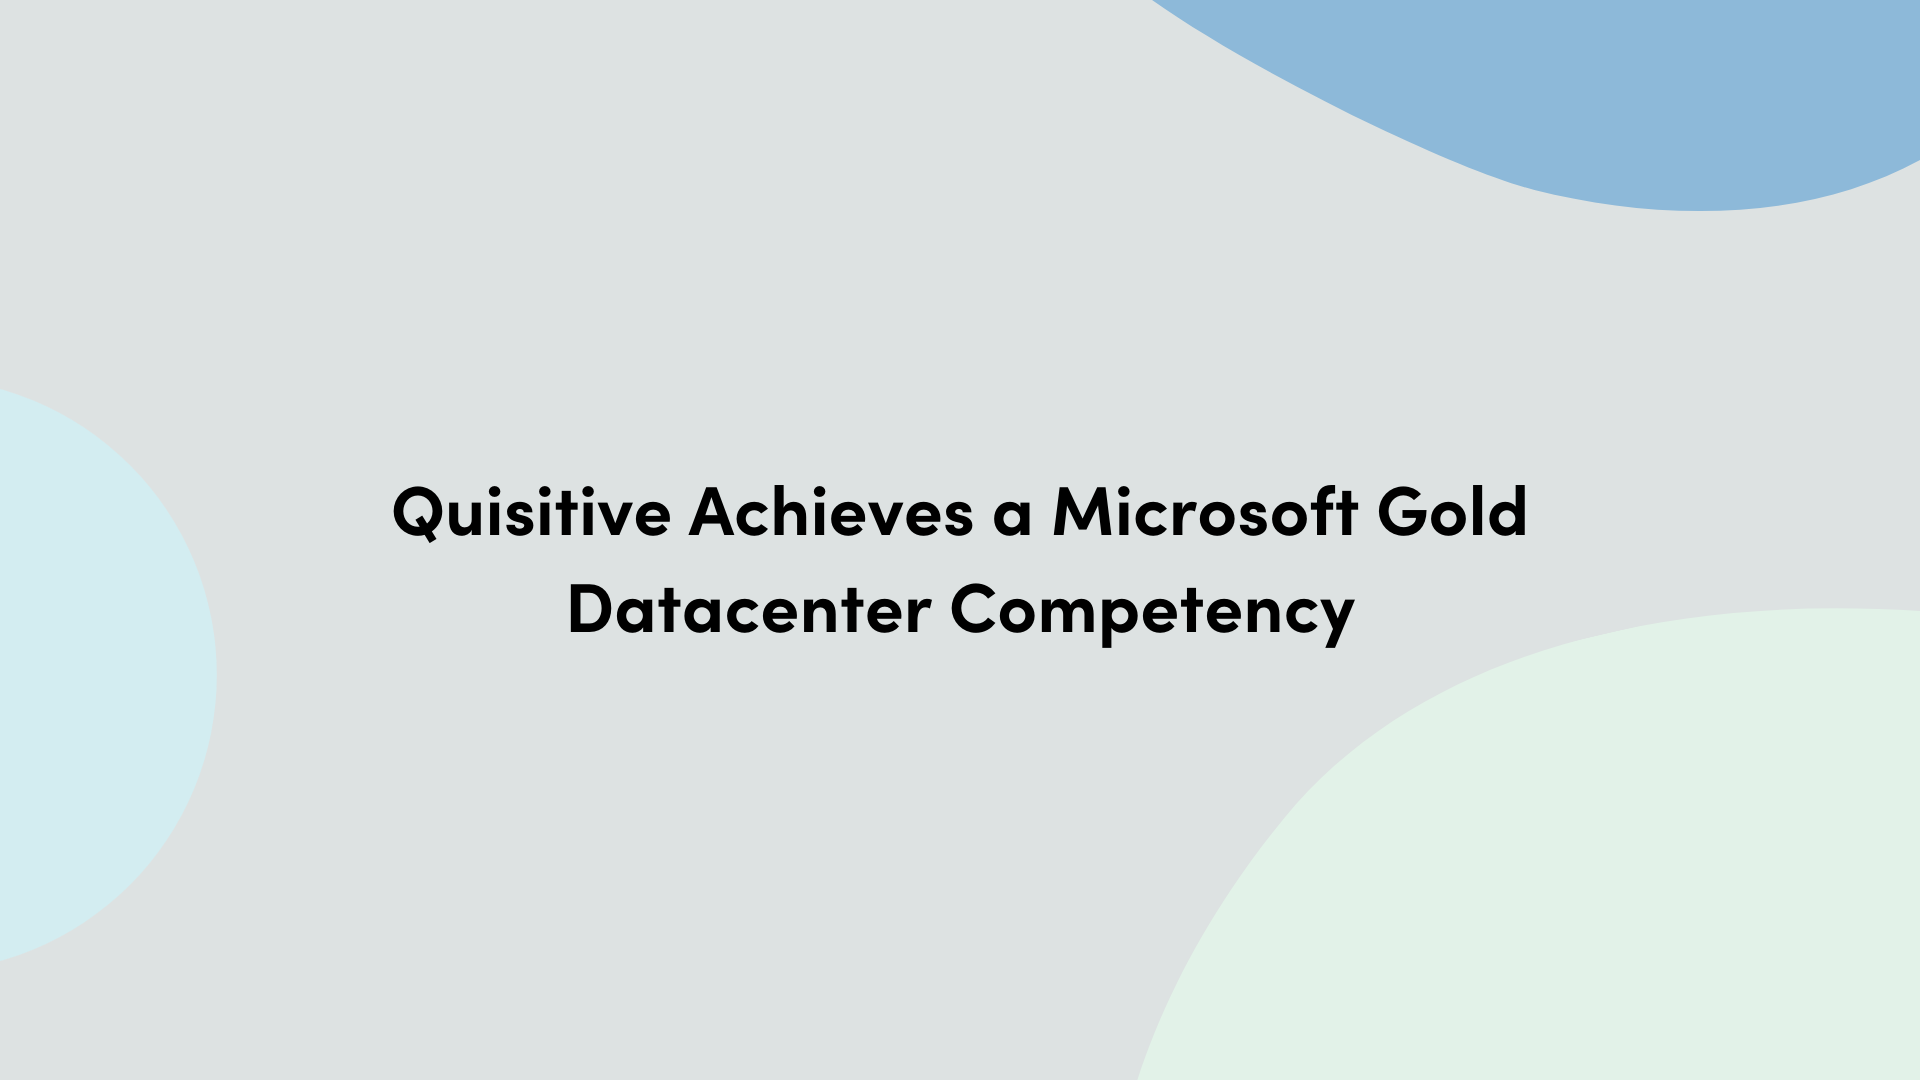 Multicolored background with text that reads Quisitive Achieves a Microsoft Gold Datacenter Competency